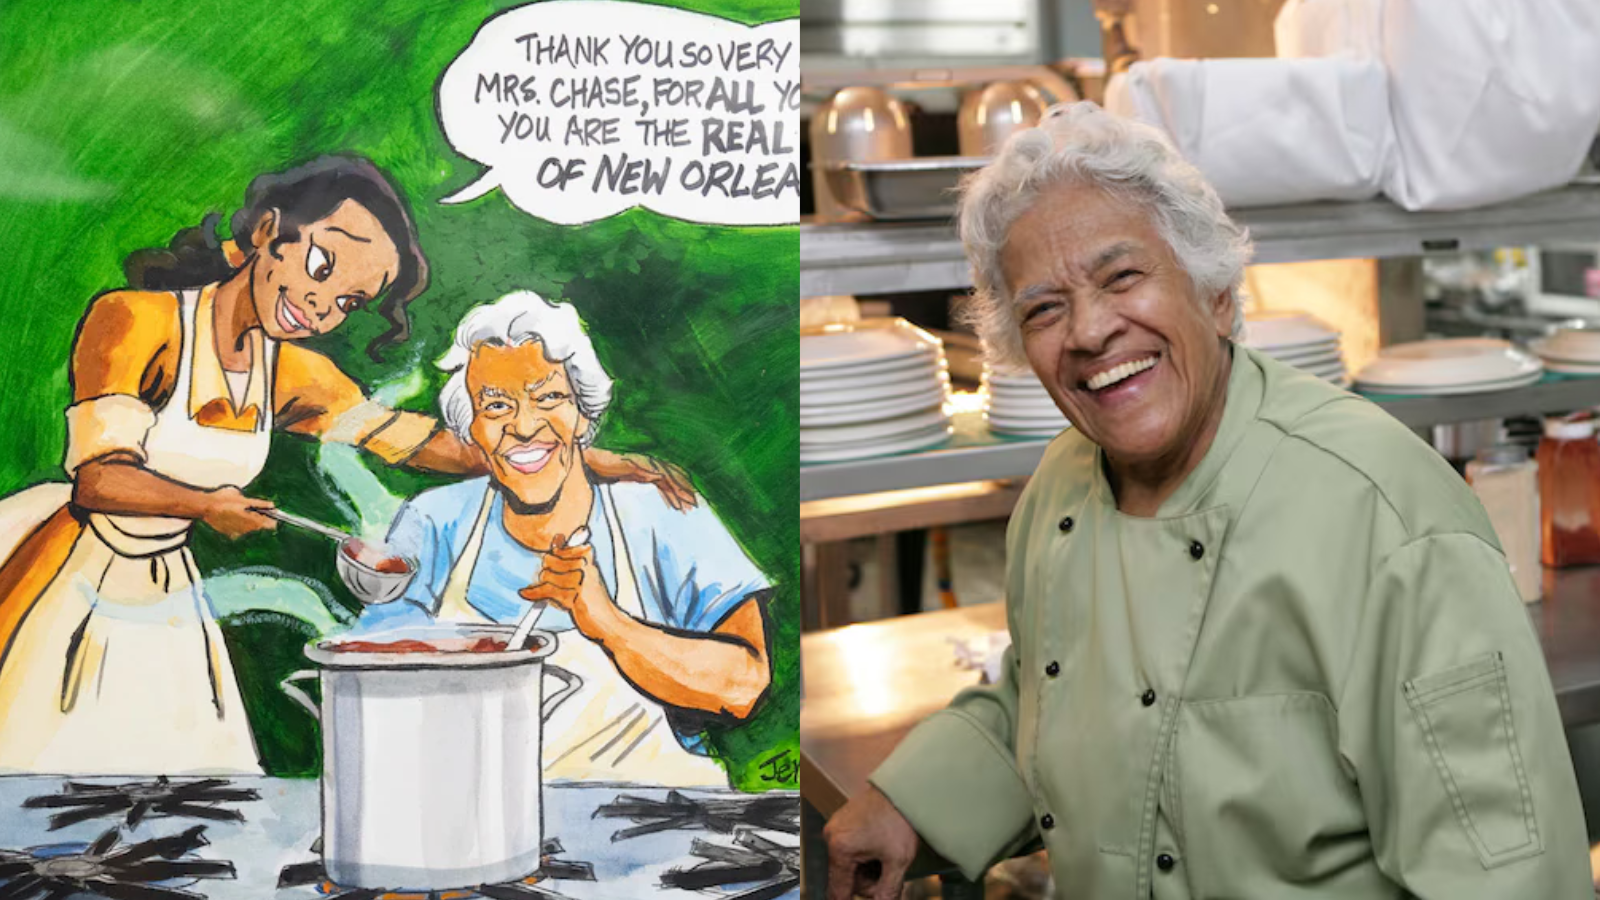 picture of leah chase at disney world